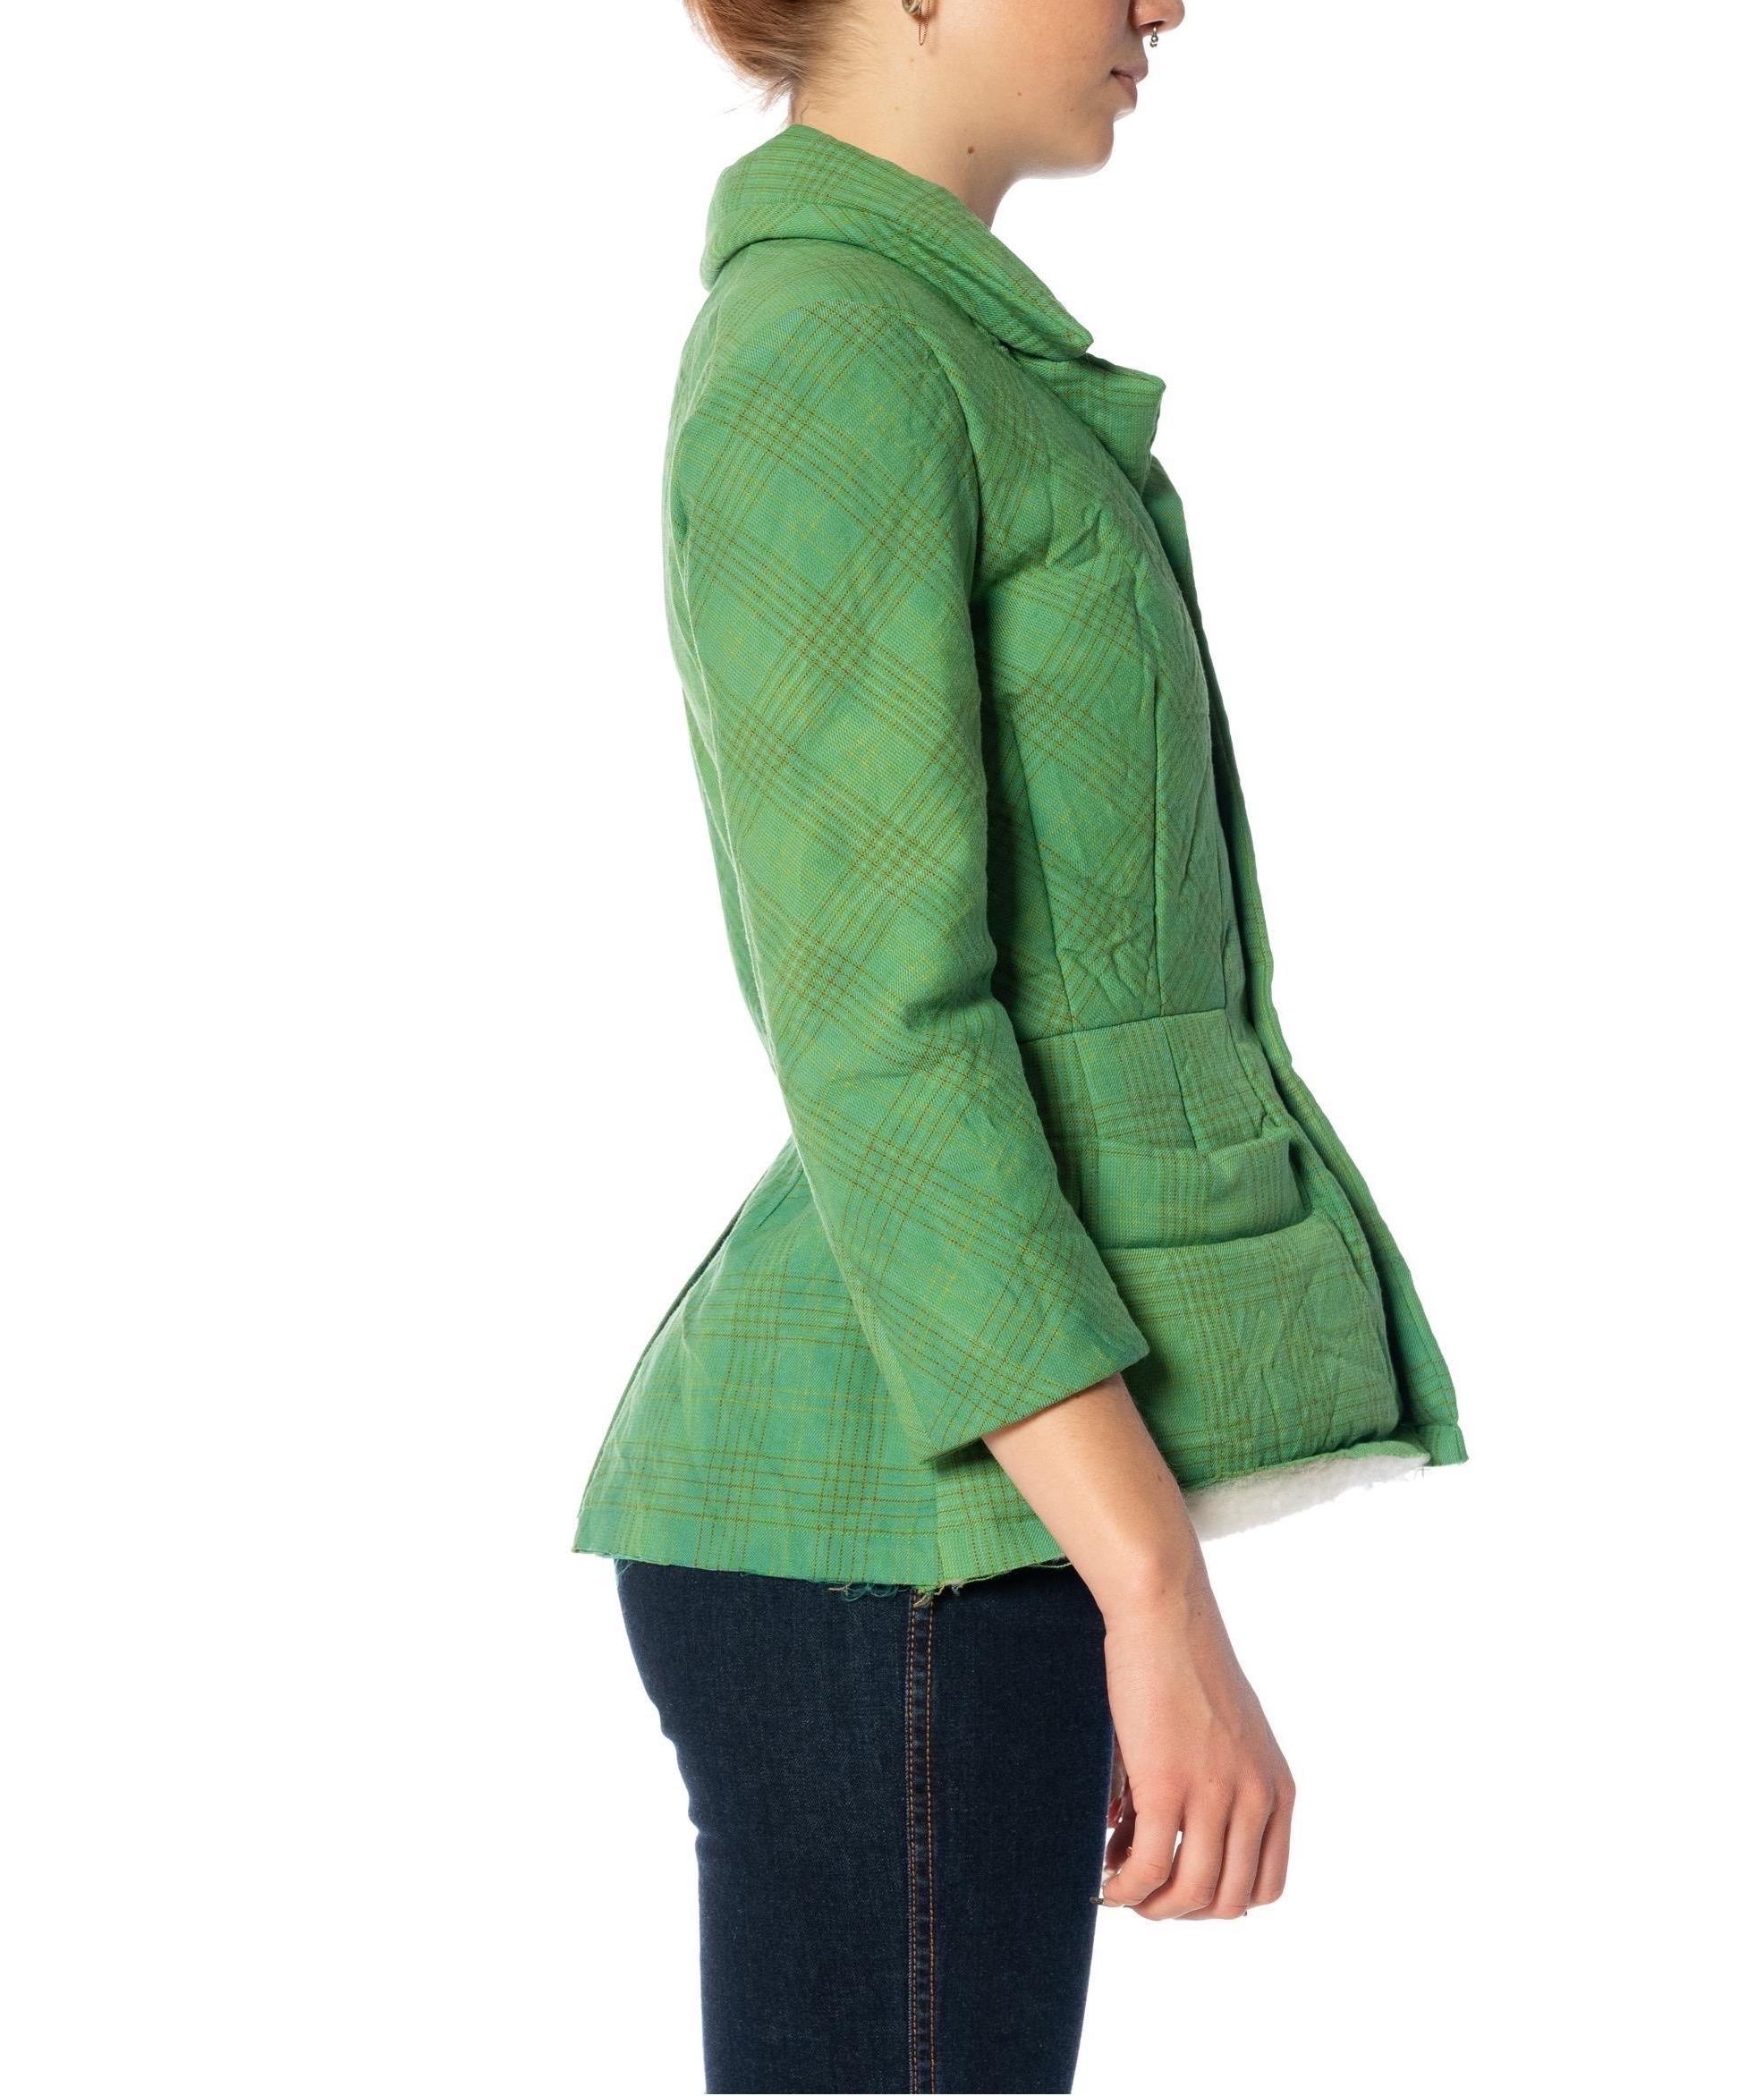 2000S JUNYA WATANABE COMME DES GARCONS Green Wrinkled Wool Jacket With Deconstr For Sale 1